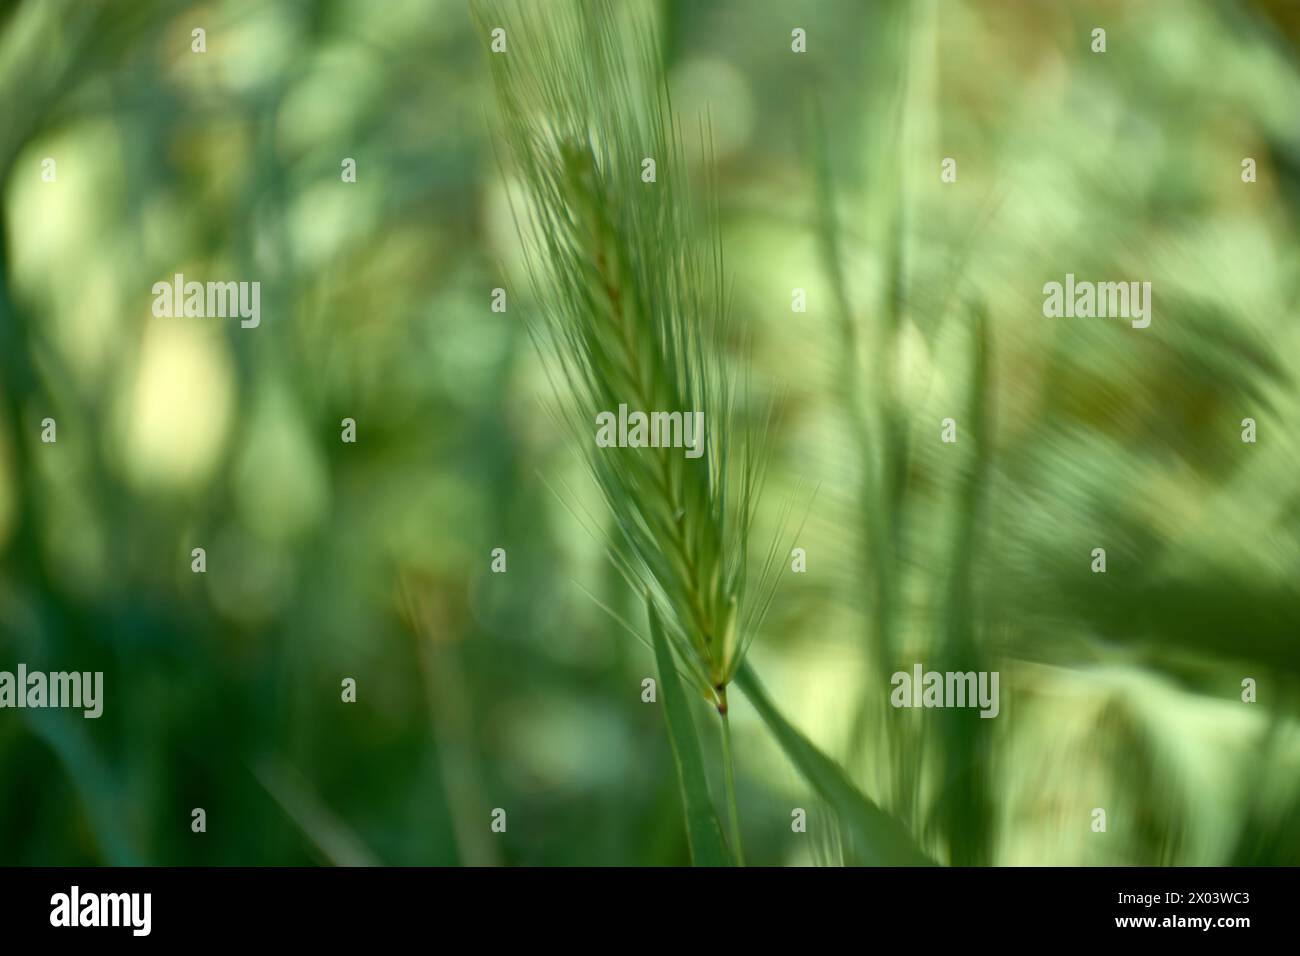 Hordeum murinum. Detail of the elongated spikes of the plant with green and out of focus background Stock Photo